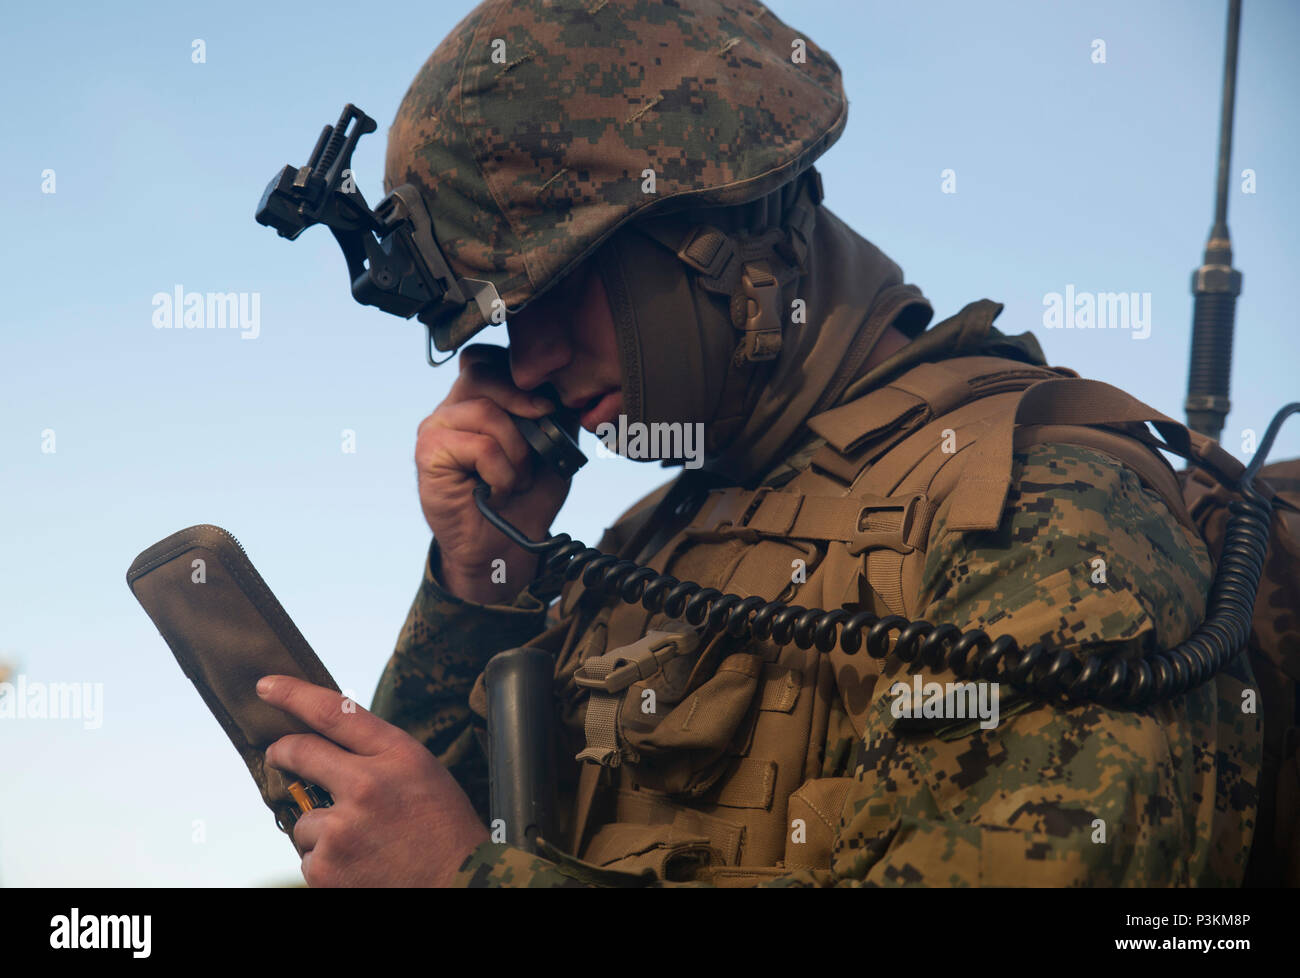 Cpl. Clayton L. Campbell, a field radio operator, makes communications with the combat operations center during Exercise Hamel at Cultana Training Area, South Australia, Australia, July 1, 2016. Exercise Hamel is a trilateral training exercise with Australian, New Zealand, and U.S. forces to enhance cooperation, trust, and friendship. Campbell, from Harrisonville, Missouri, is with Company A, 1st Battalion, 1st Marine Regiment, Marine Rotational Force – Darwin. (U.S. Marine Corps photo by Cpl. Carlos Cruz Jr./Released) Stock Photo